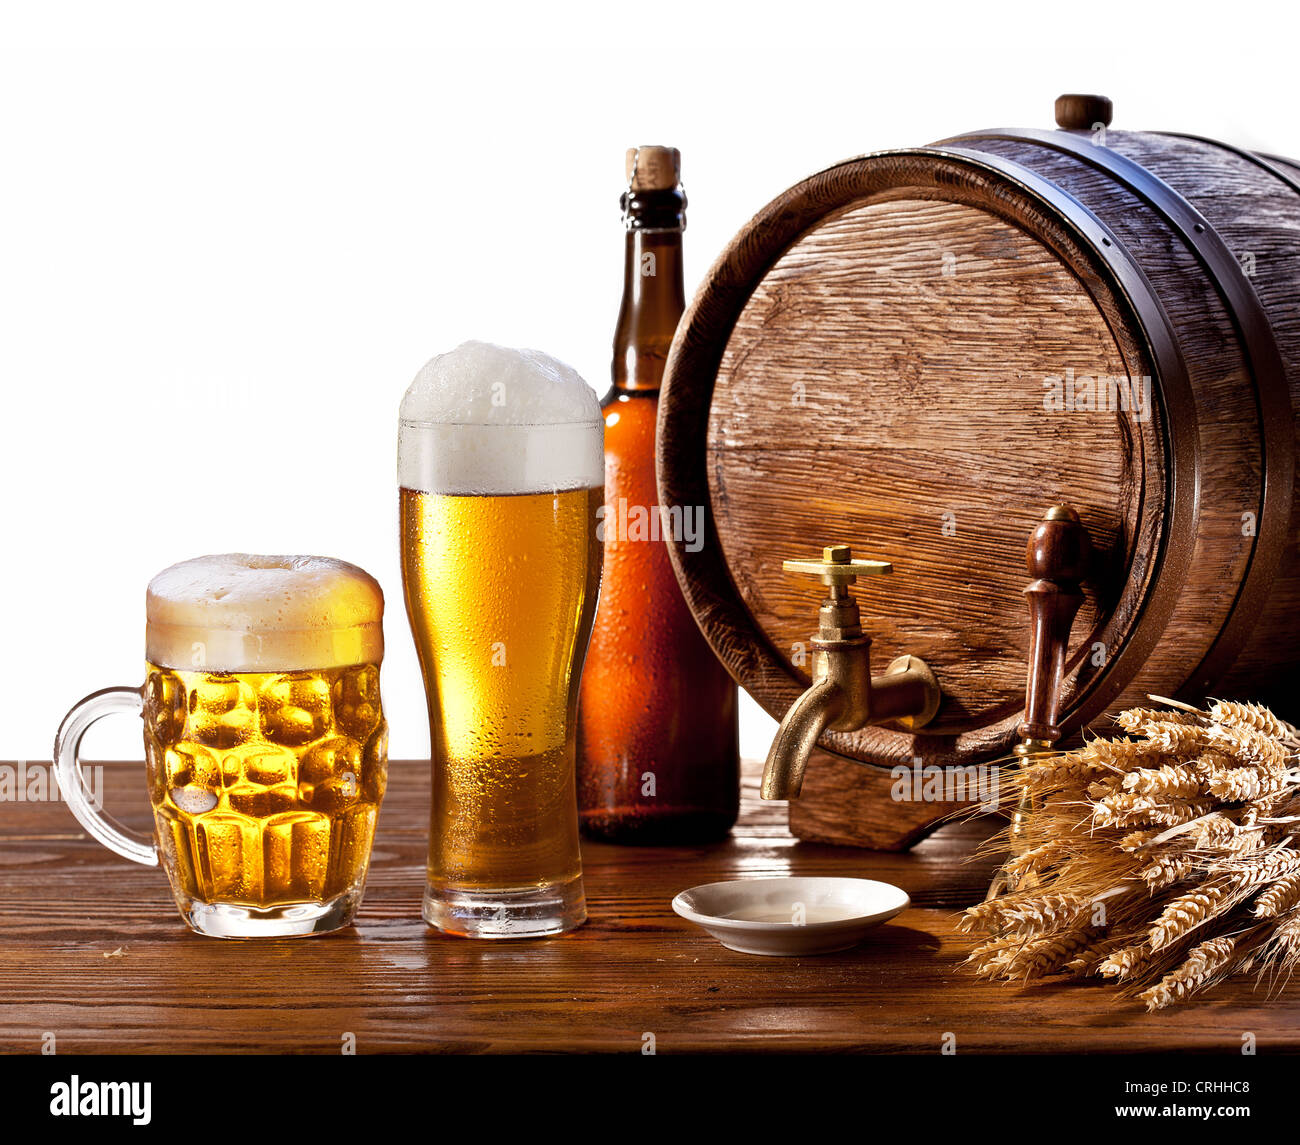 Beer barrel with beer glasses on a wooden table. Isolated on a white background. Stock Photo